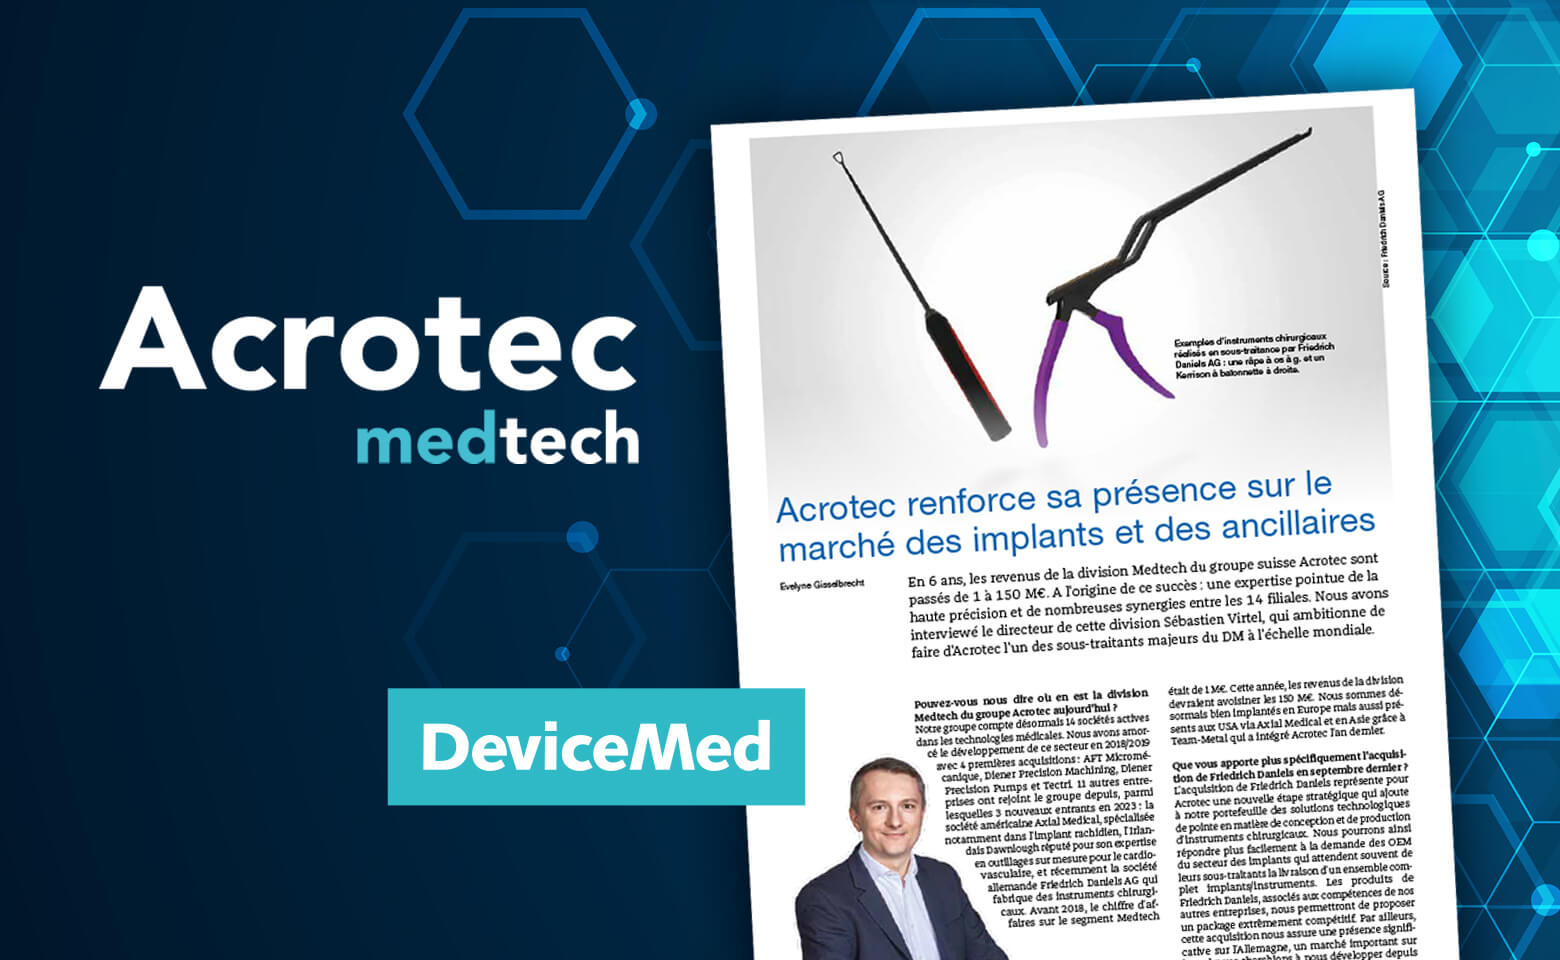 Acrotec strengthens its presence in the implants and ancillaries market